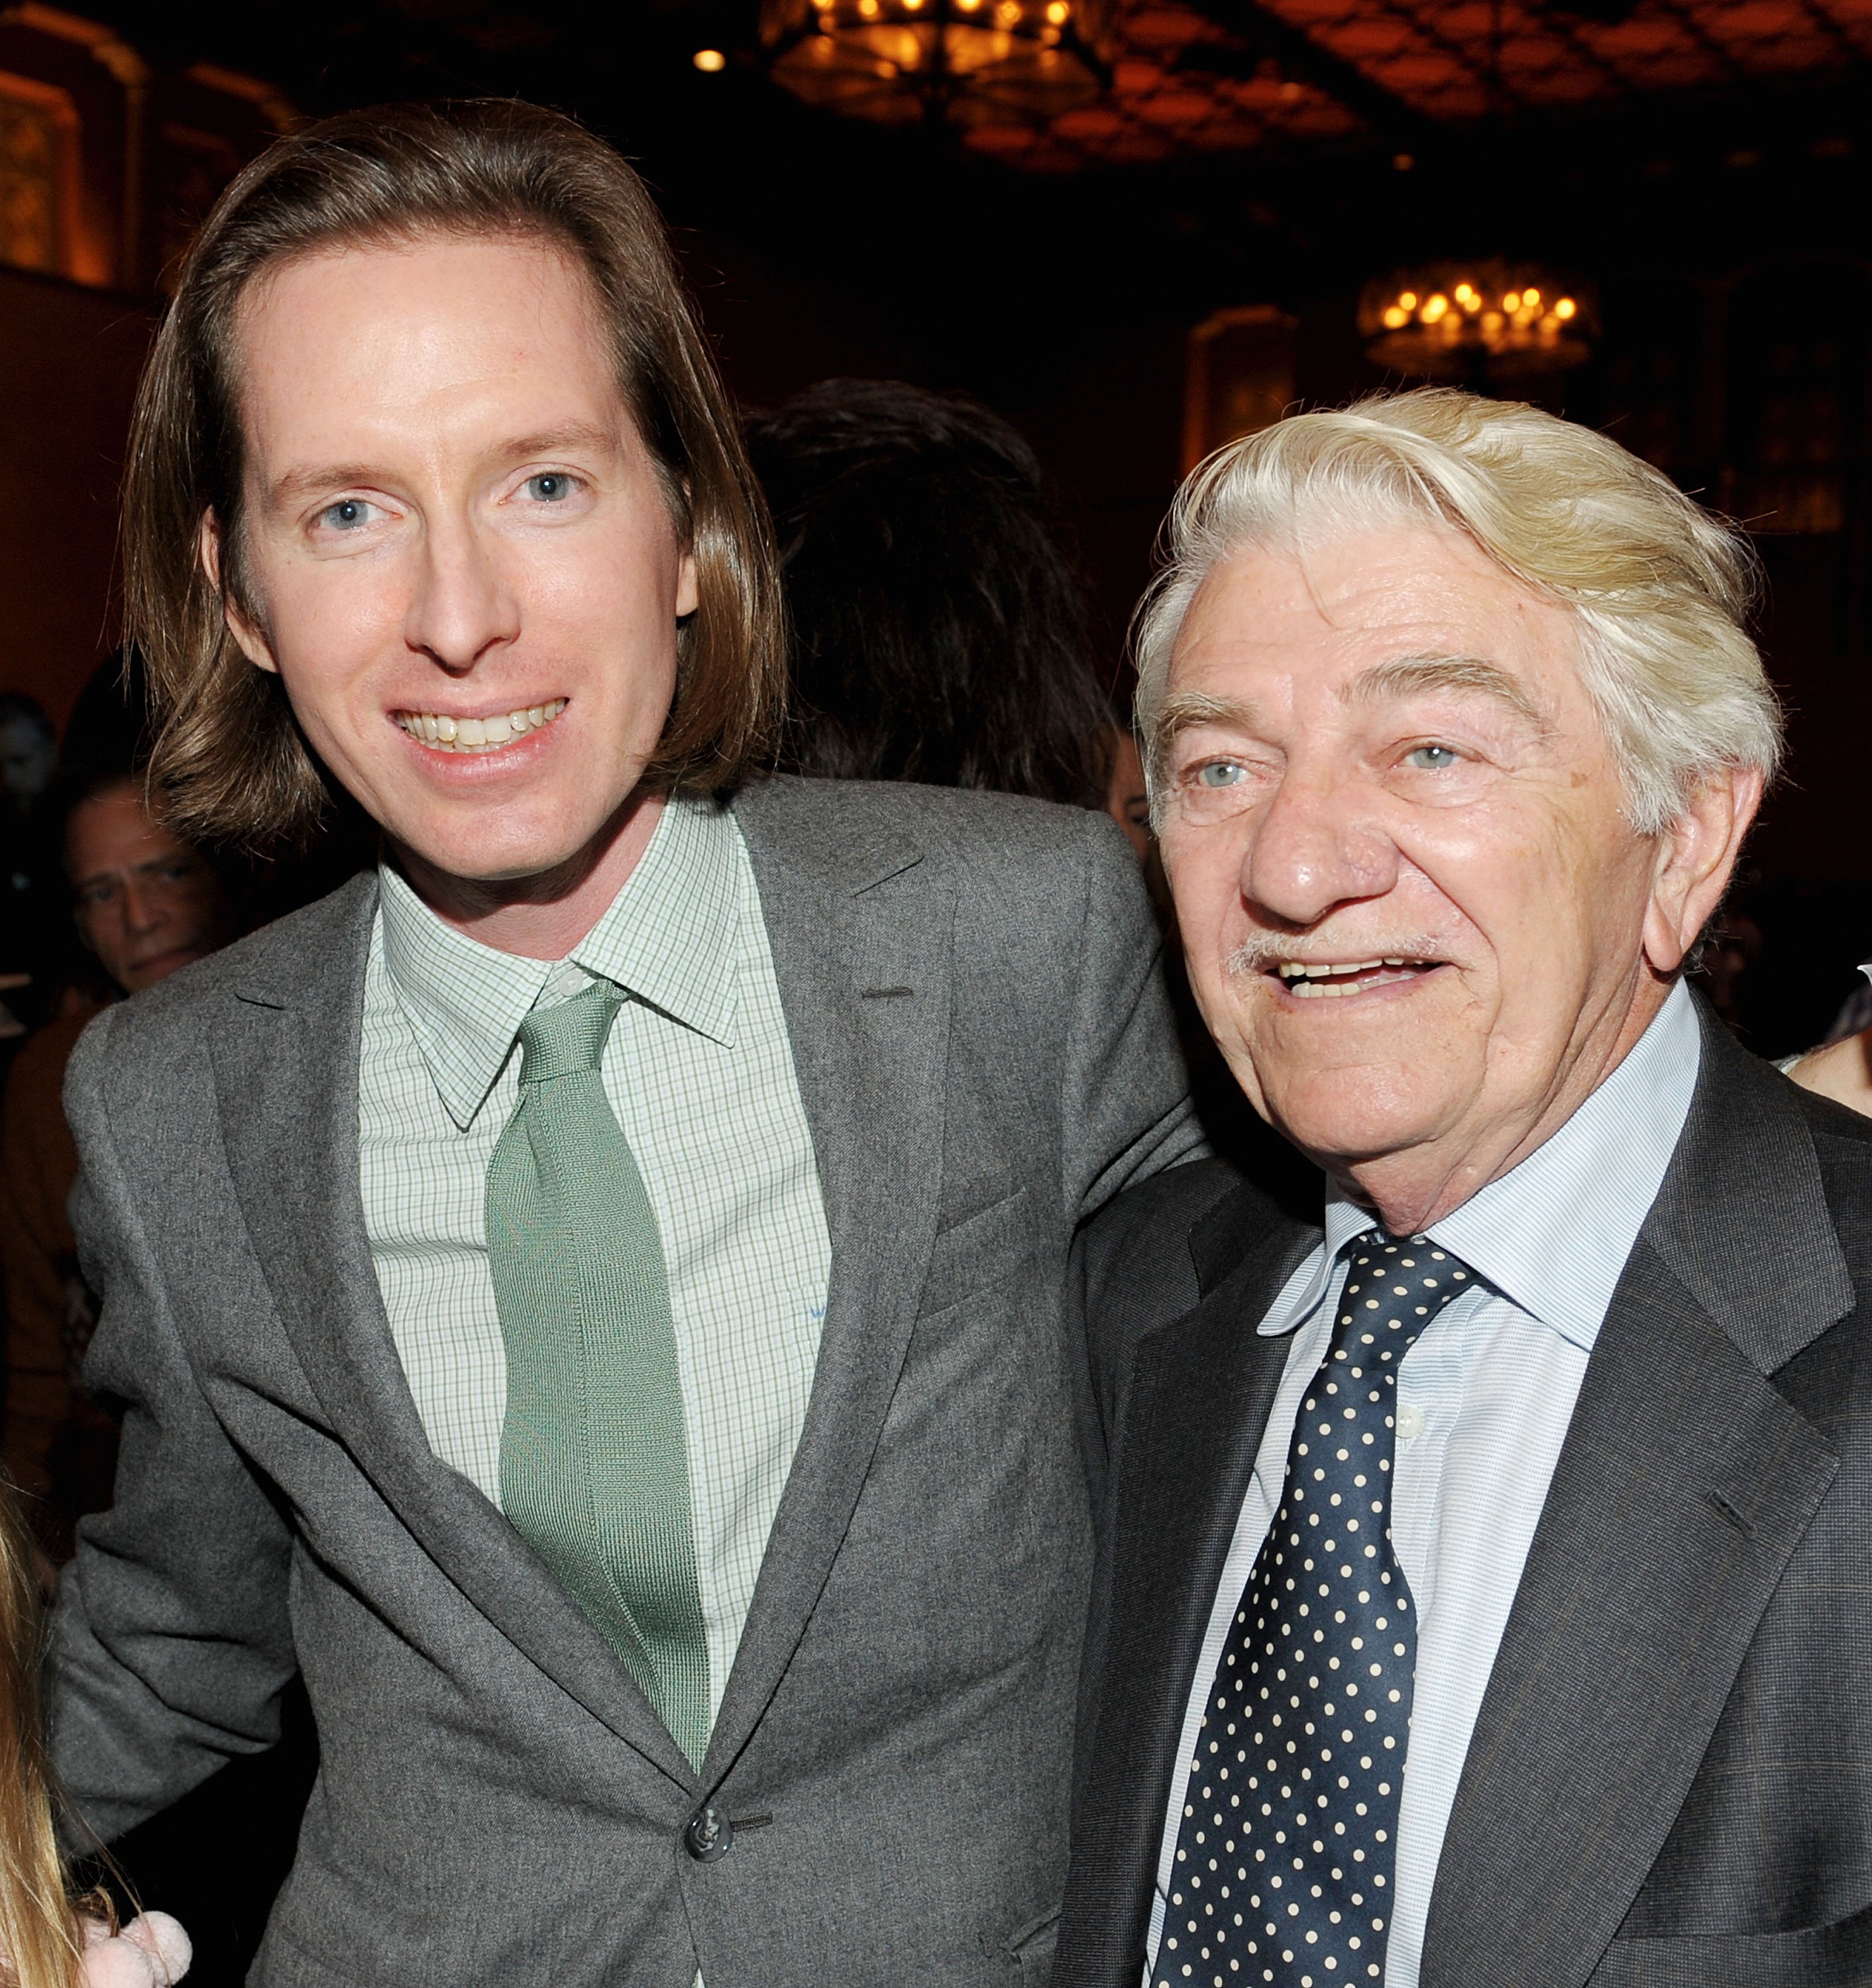 Wes Anderson and Seymour Cassel at the afterparty for the AFI FEST 2009 premiere of "Fantastic Mr. Fox" on October 30, 2009 in Los Angeles | Source: Getty Images